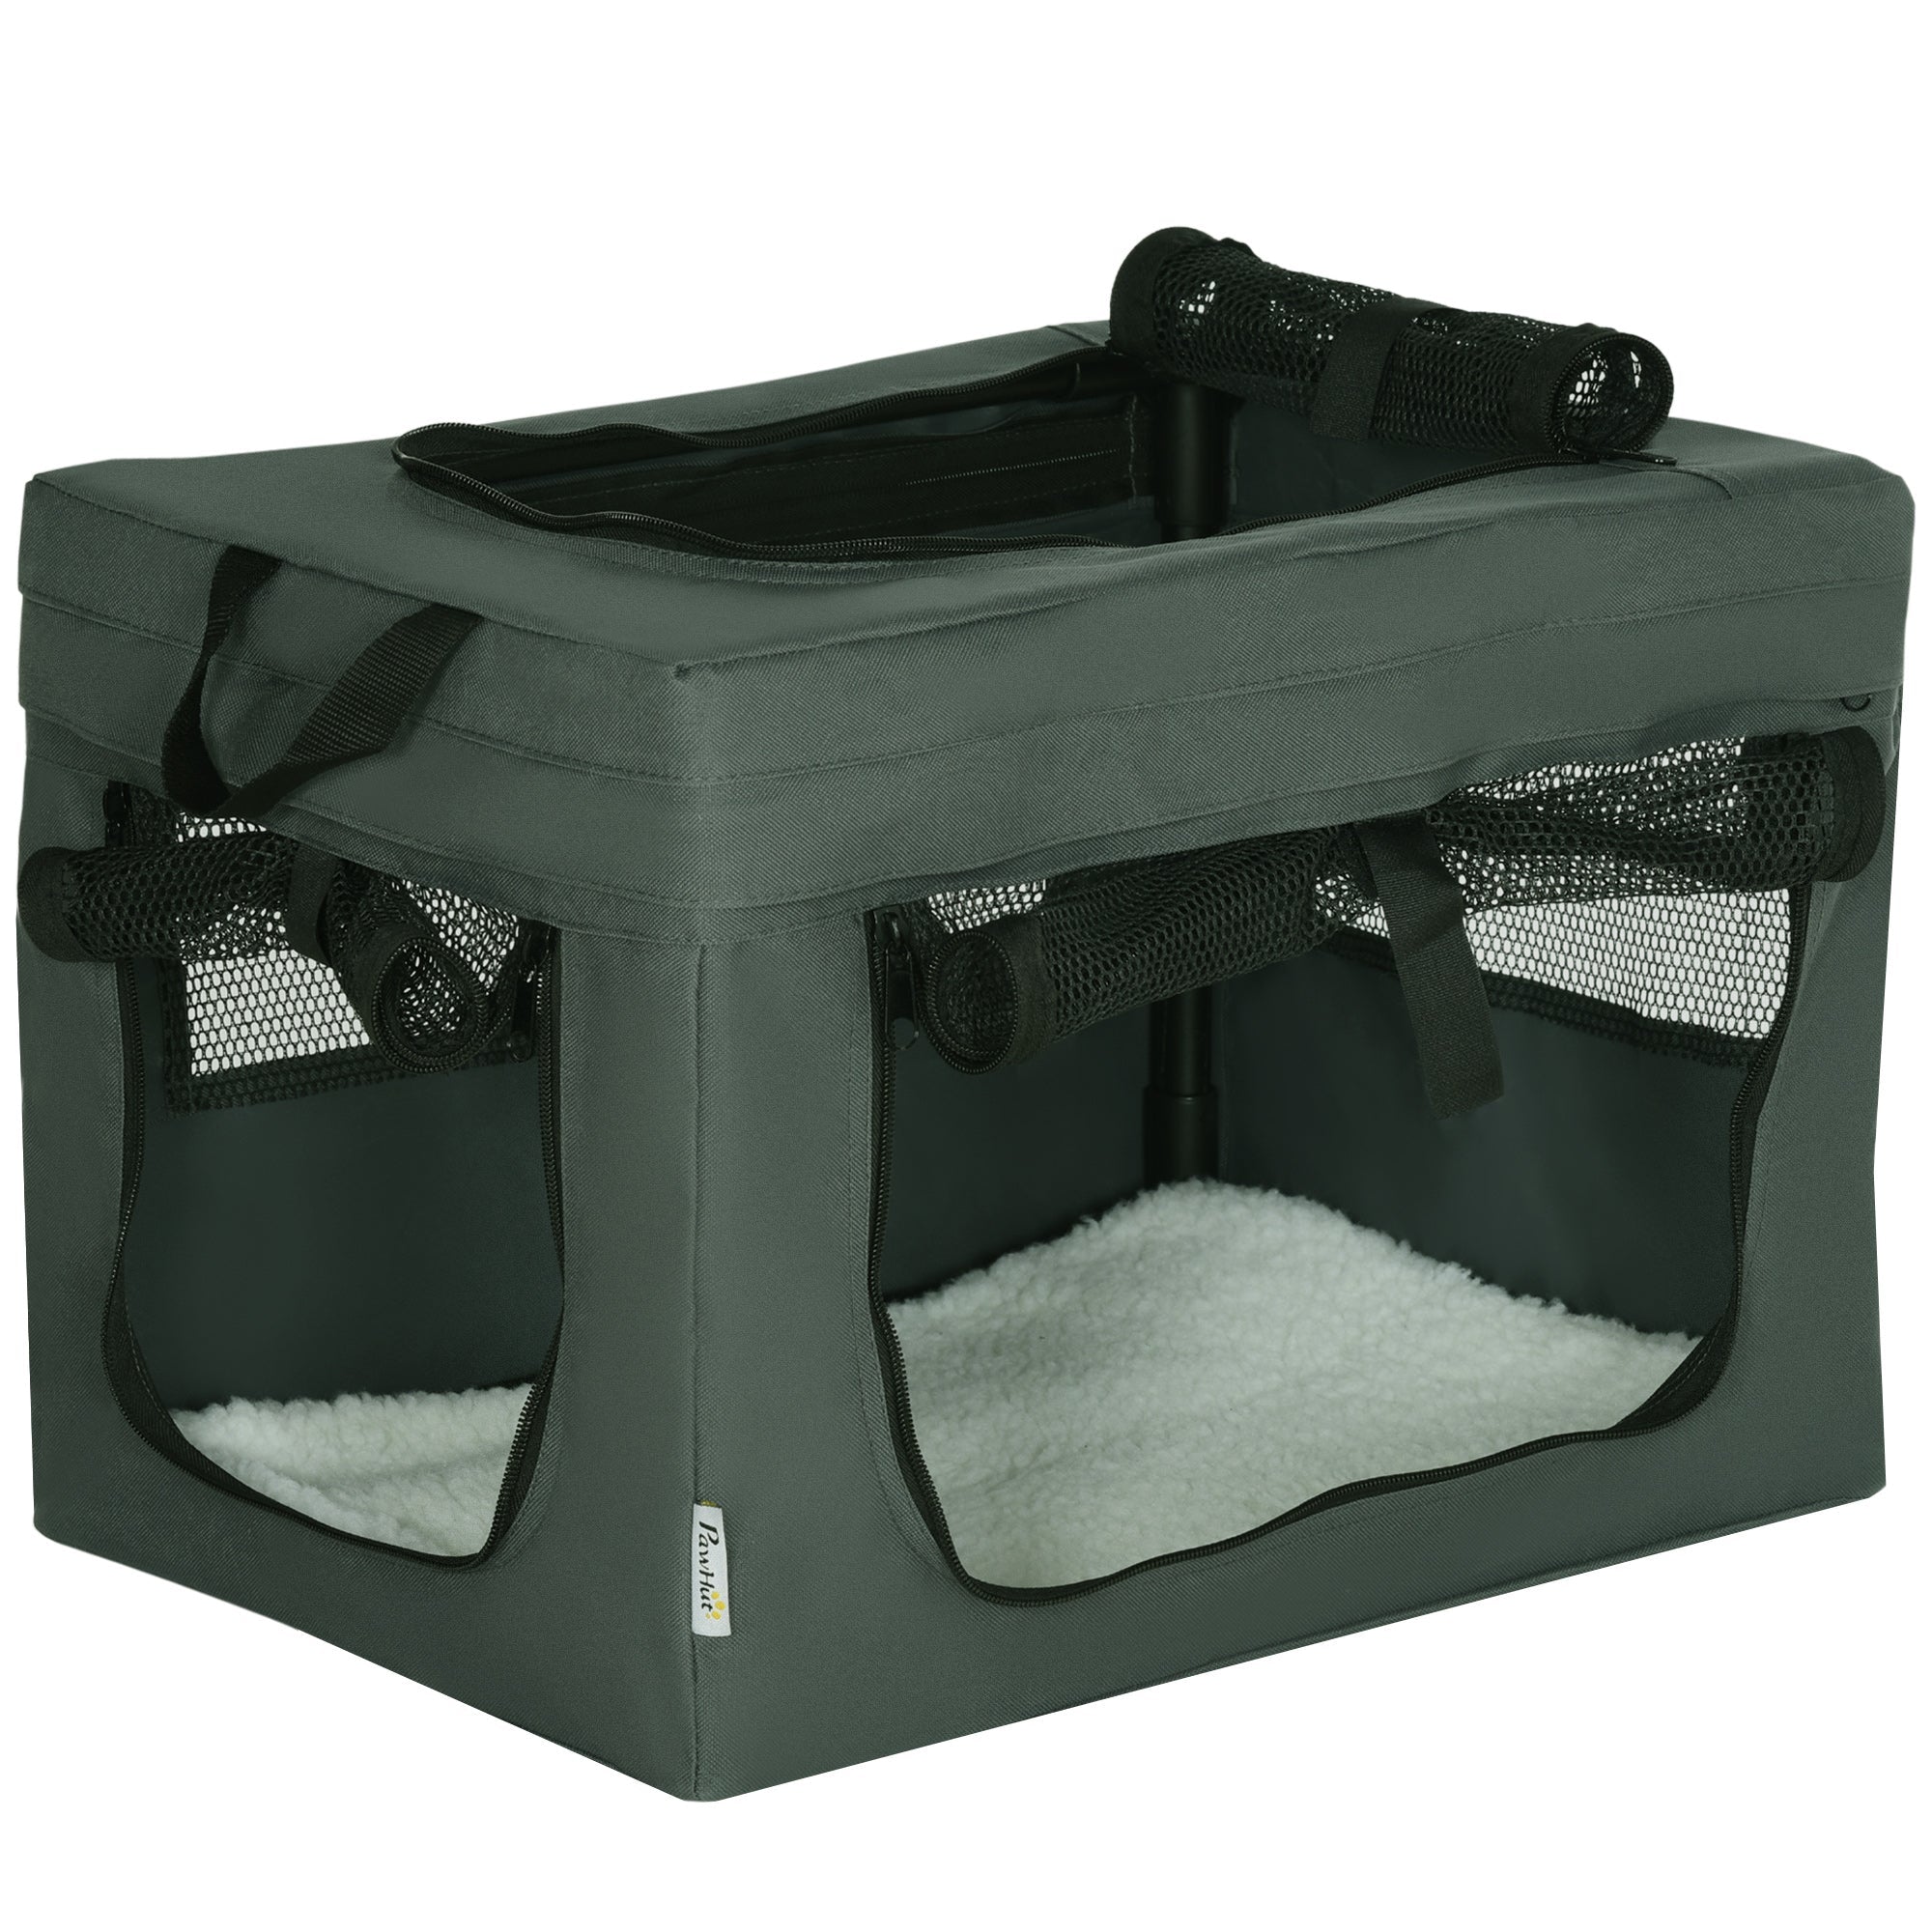 Compact 48.5cm Pet Carrier for Miniature Dogs with Cushion, PawHut, Grey